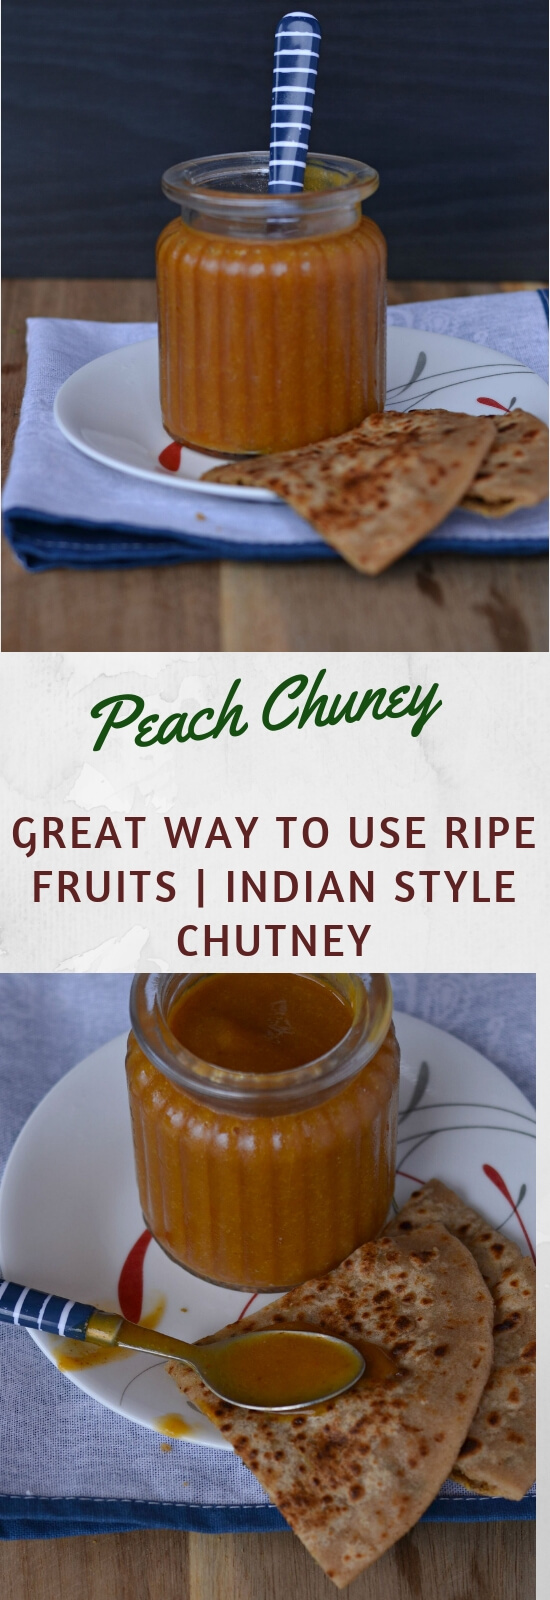 Peach chutney is sweet, slightly hot and savory condiment which goes very well with fritters, sandwiches, Indian flatbread (paratha) and many more. This taste great with the goodness of peach. 